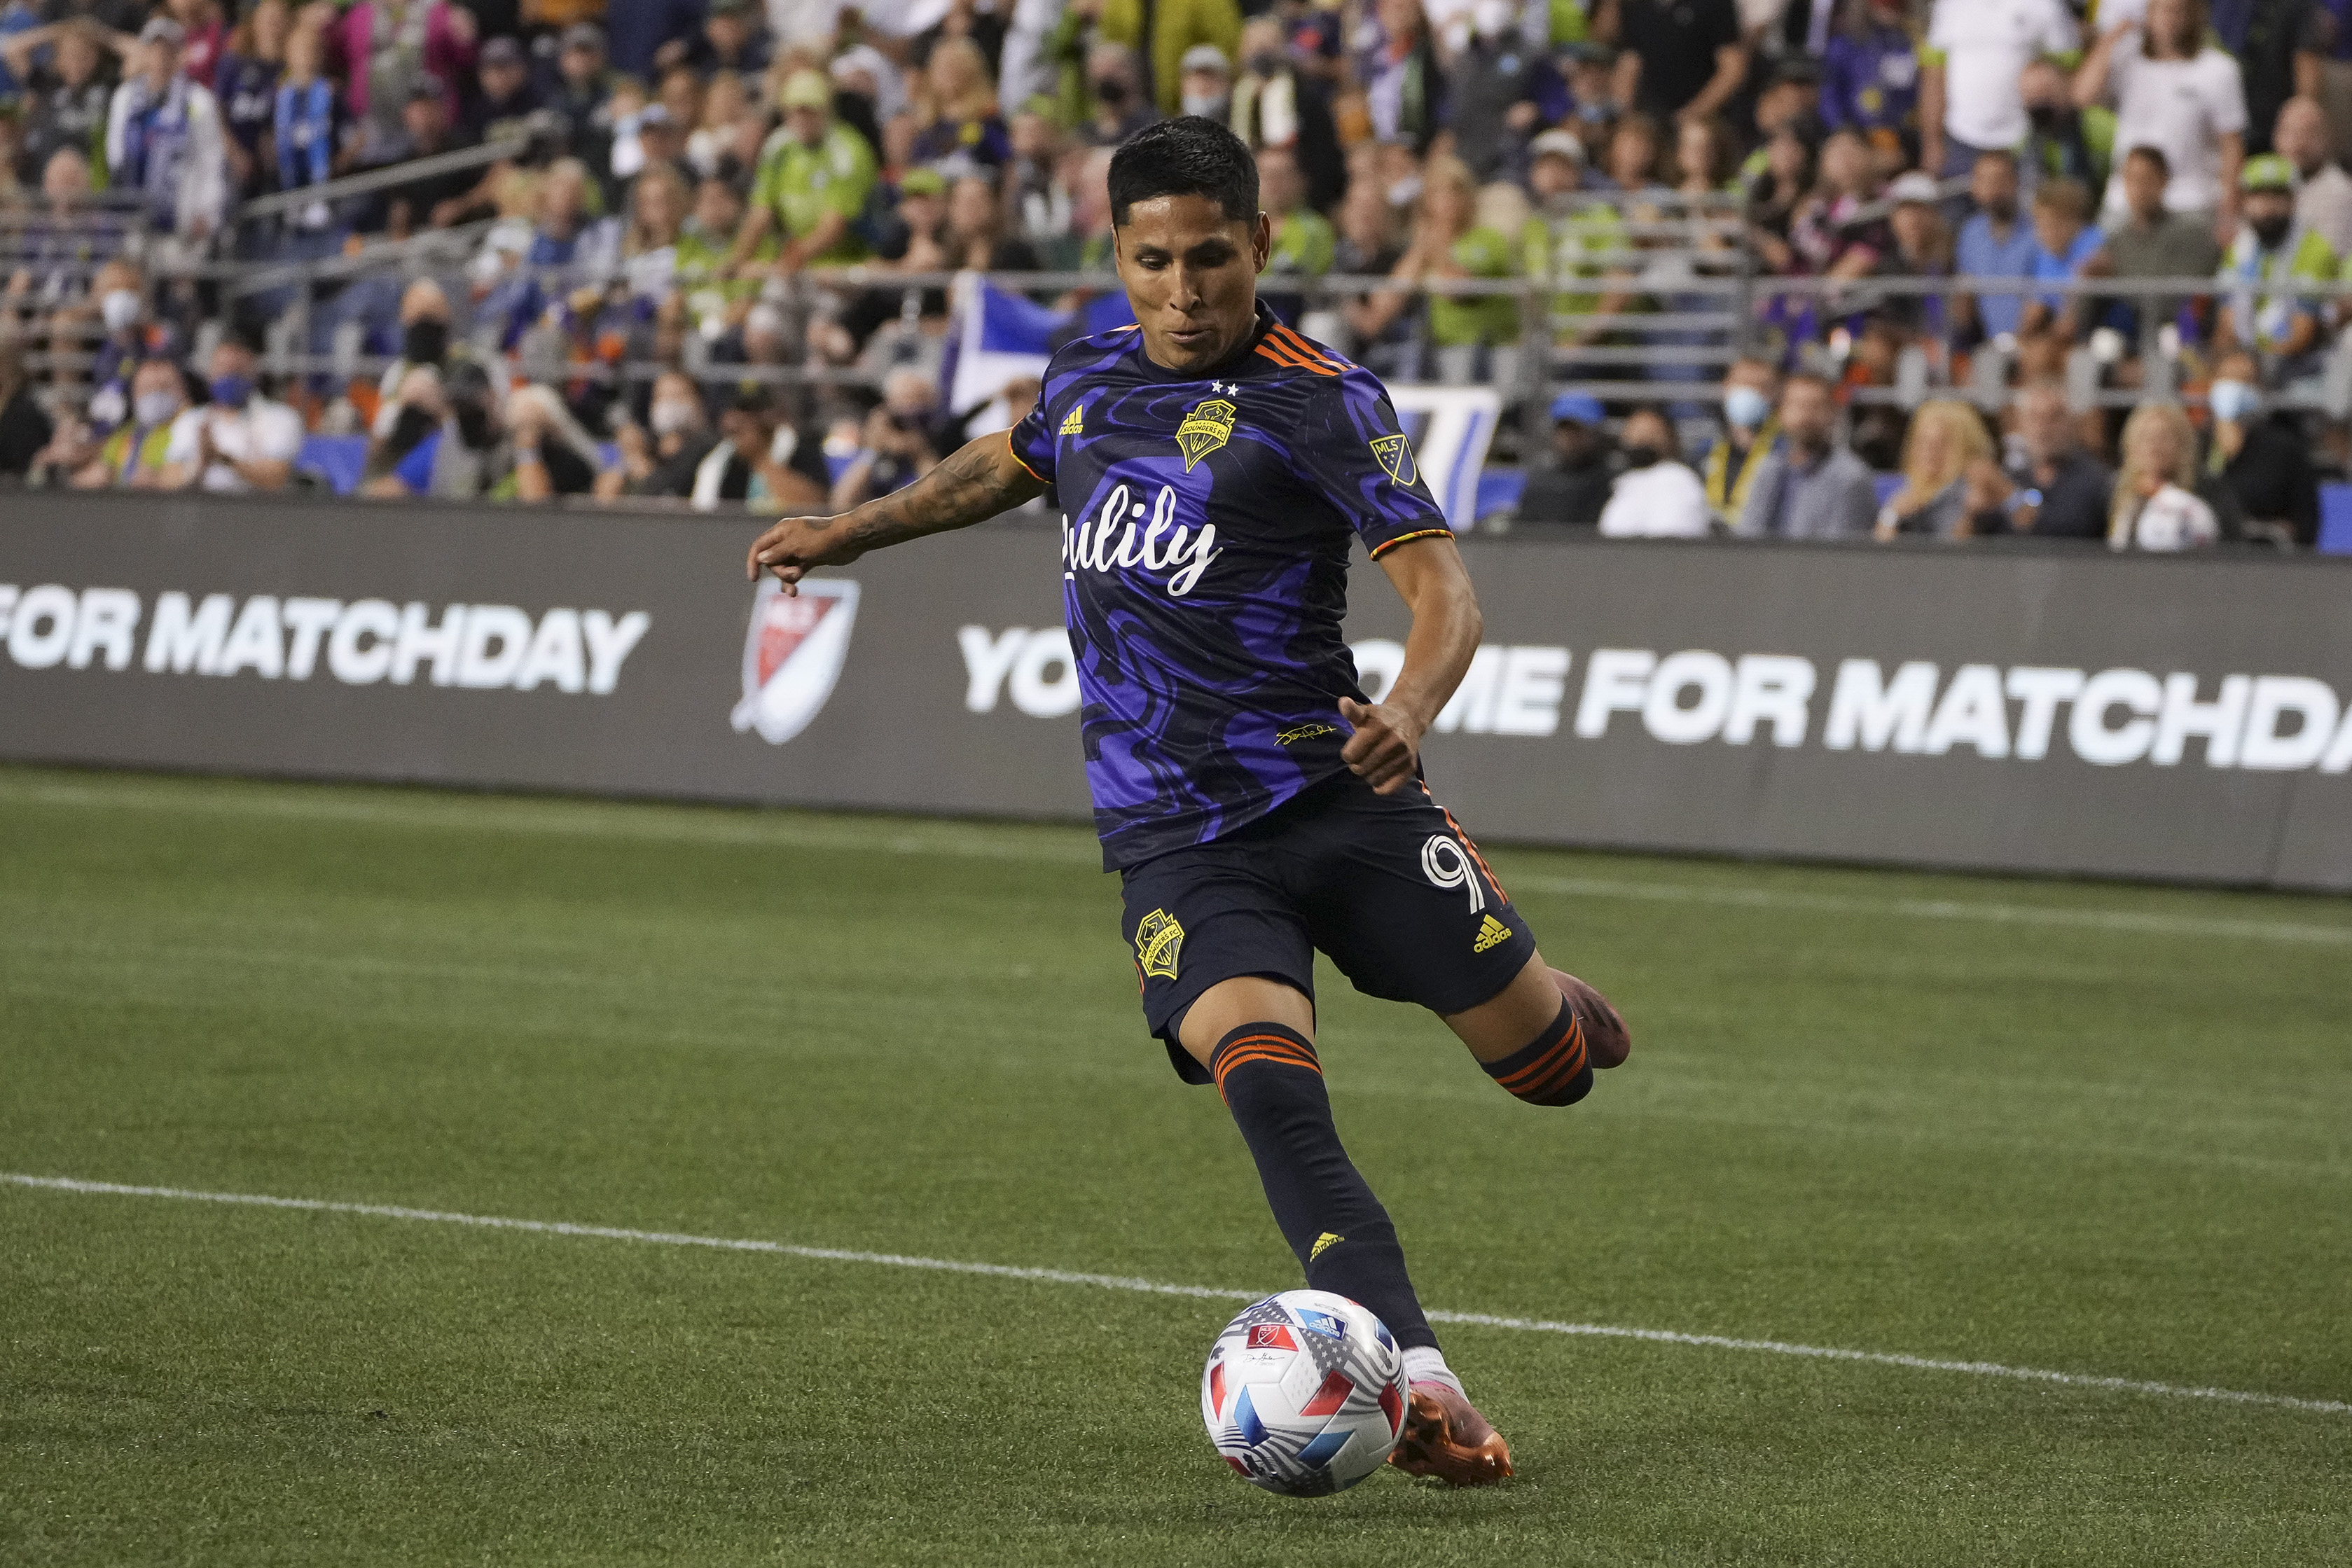 Seattle Sounders forward Raul Ruidiaz (9) in action during an MLS match between the Portland Timbers and the Seattle Sounders on August 29, 2021 at Lumen Field in Seattle, WA.